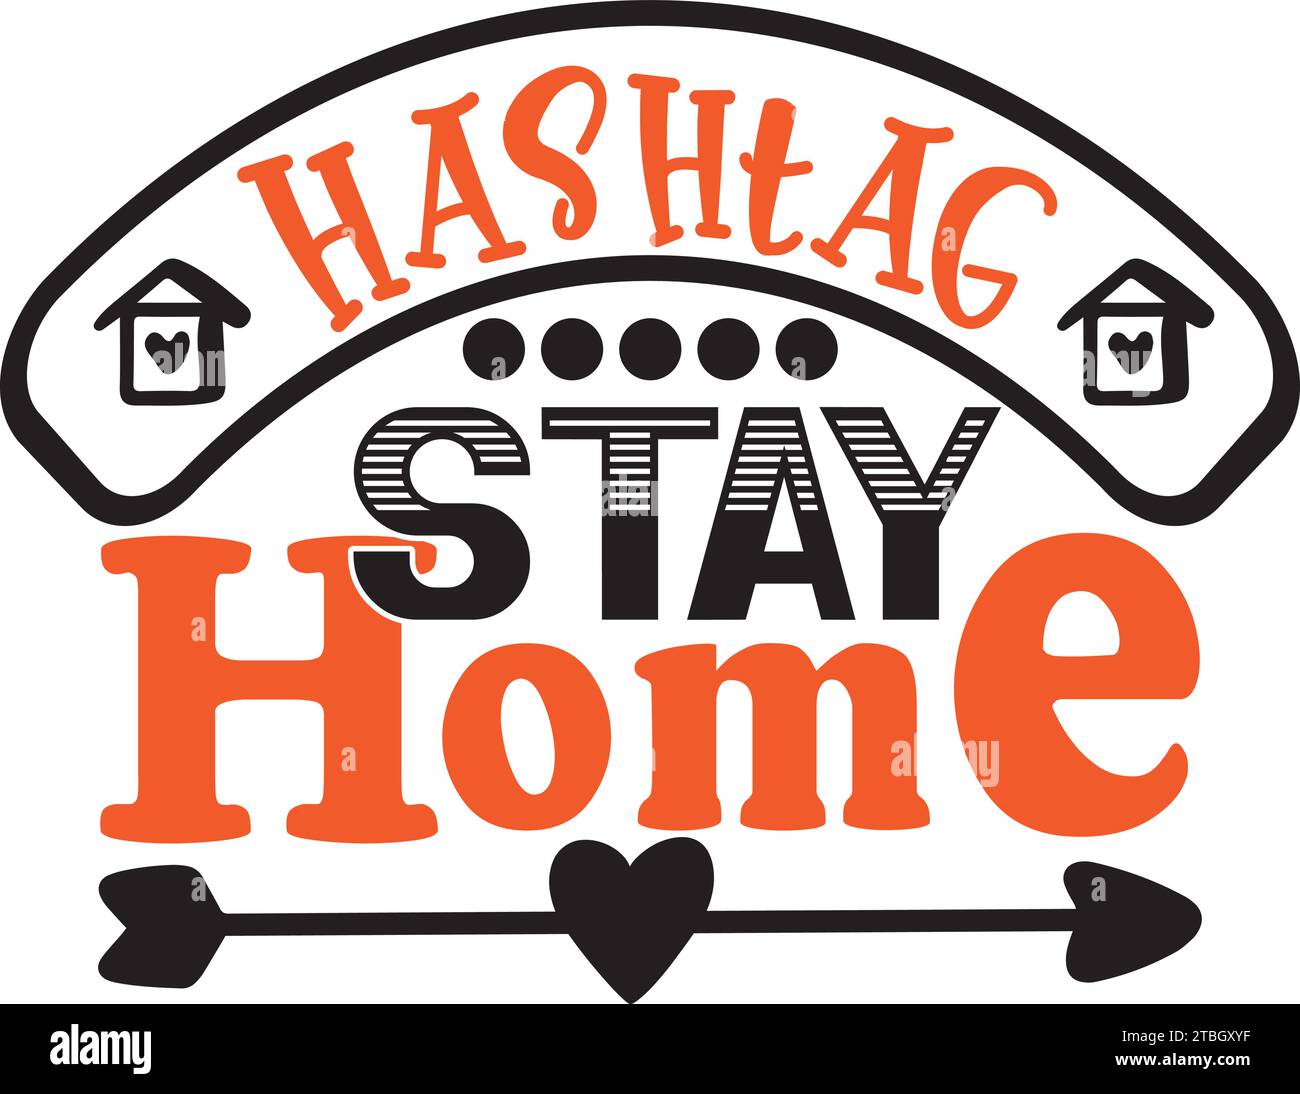 Hashtag Stay Home SVG Stock Vector